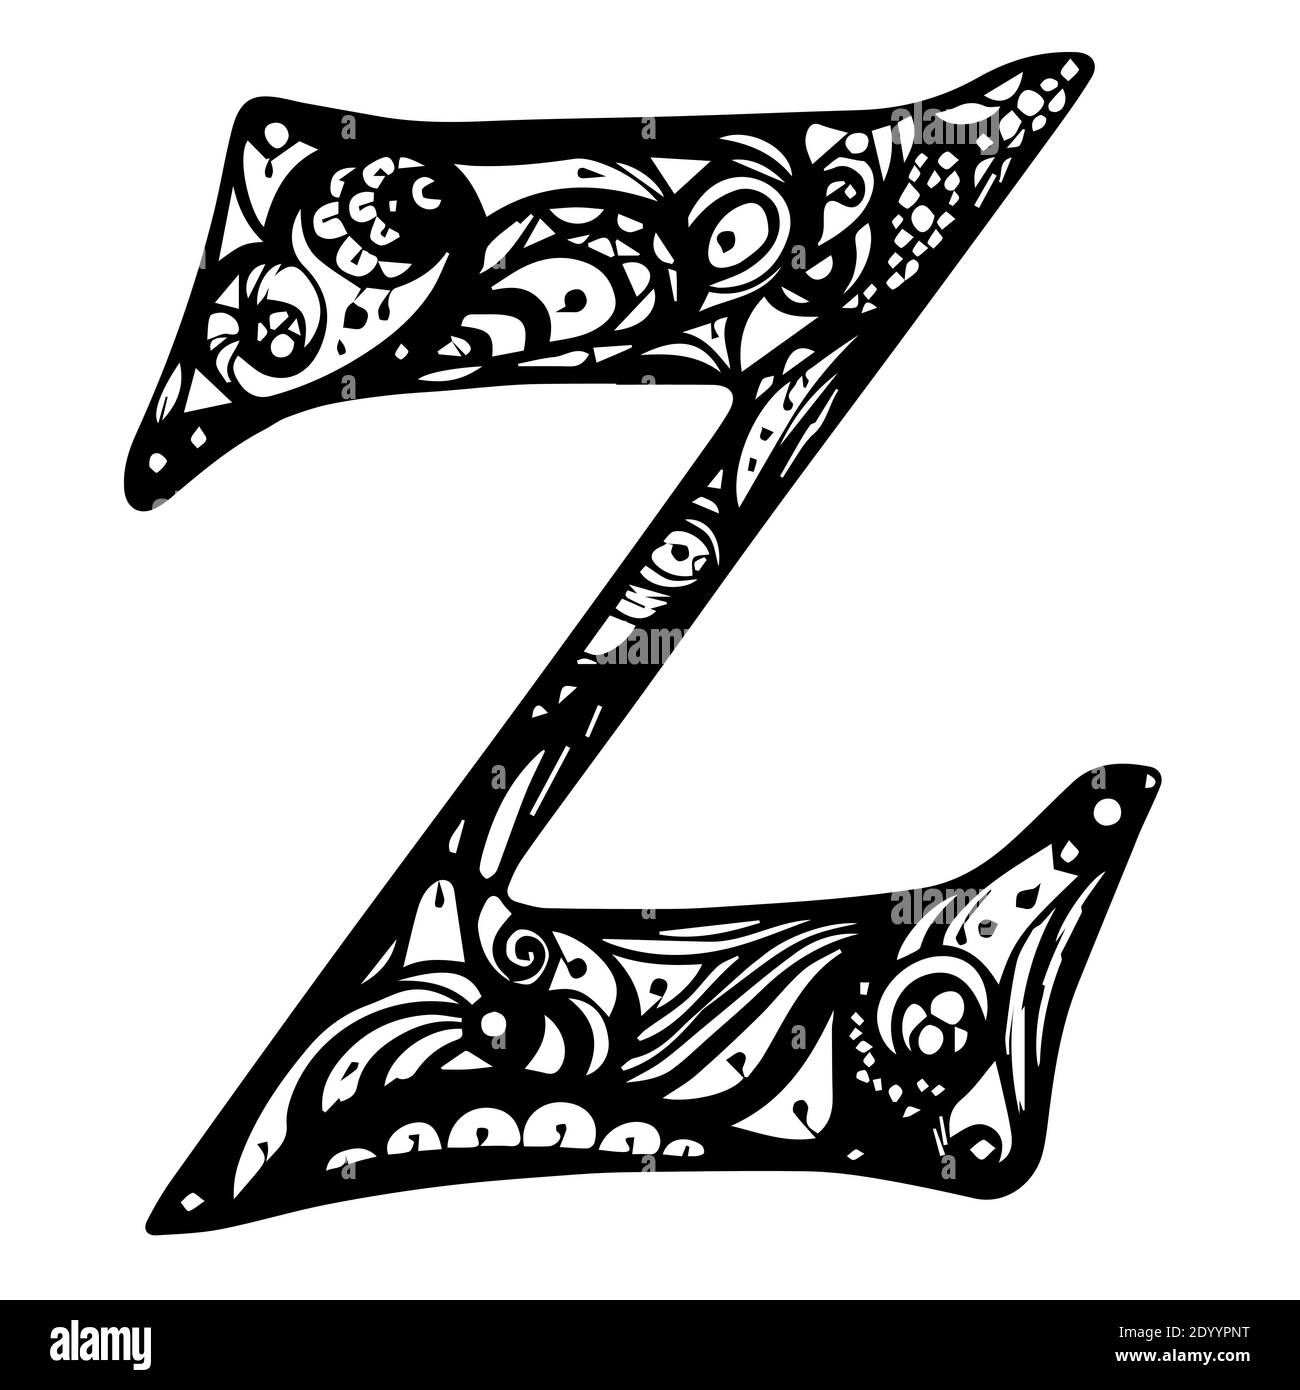 Ideas for a cover up Its a memorial tattoo for my cat is supposed to be  the letter z but it somehow got fucked up and I hate it Plus I have